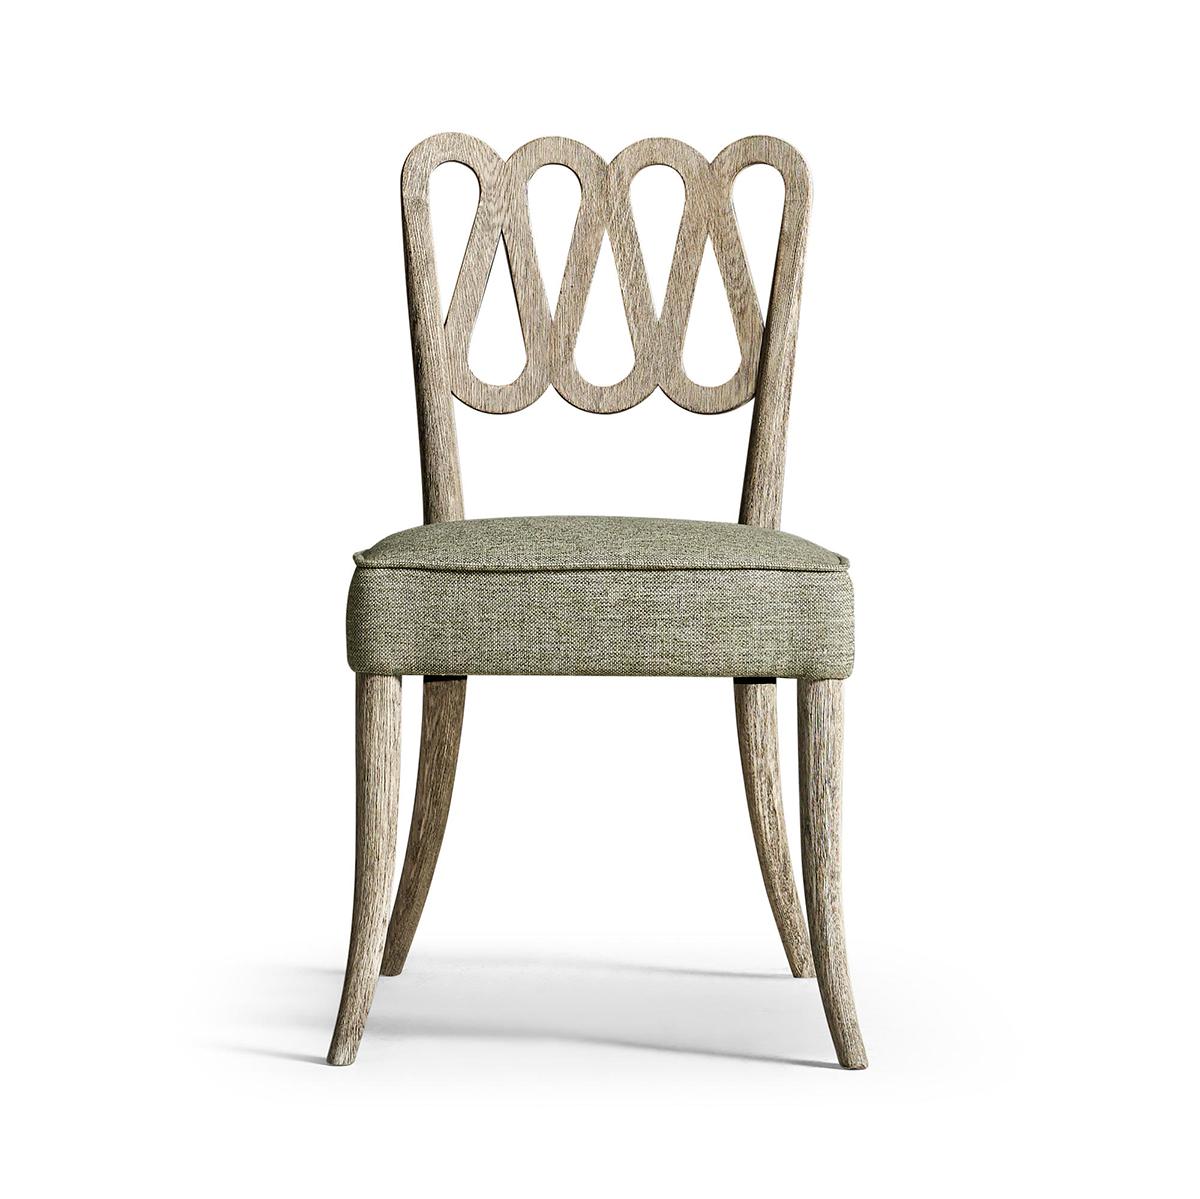 A stunning embodiment of sophistication and modern design. Crafted from high-quality solid oak, this chair showcases a washed grey oak finish, beautifully exposing the natural texture and grain of the wood. Its unique silhouette and elegantly curved